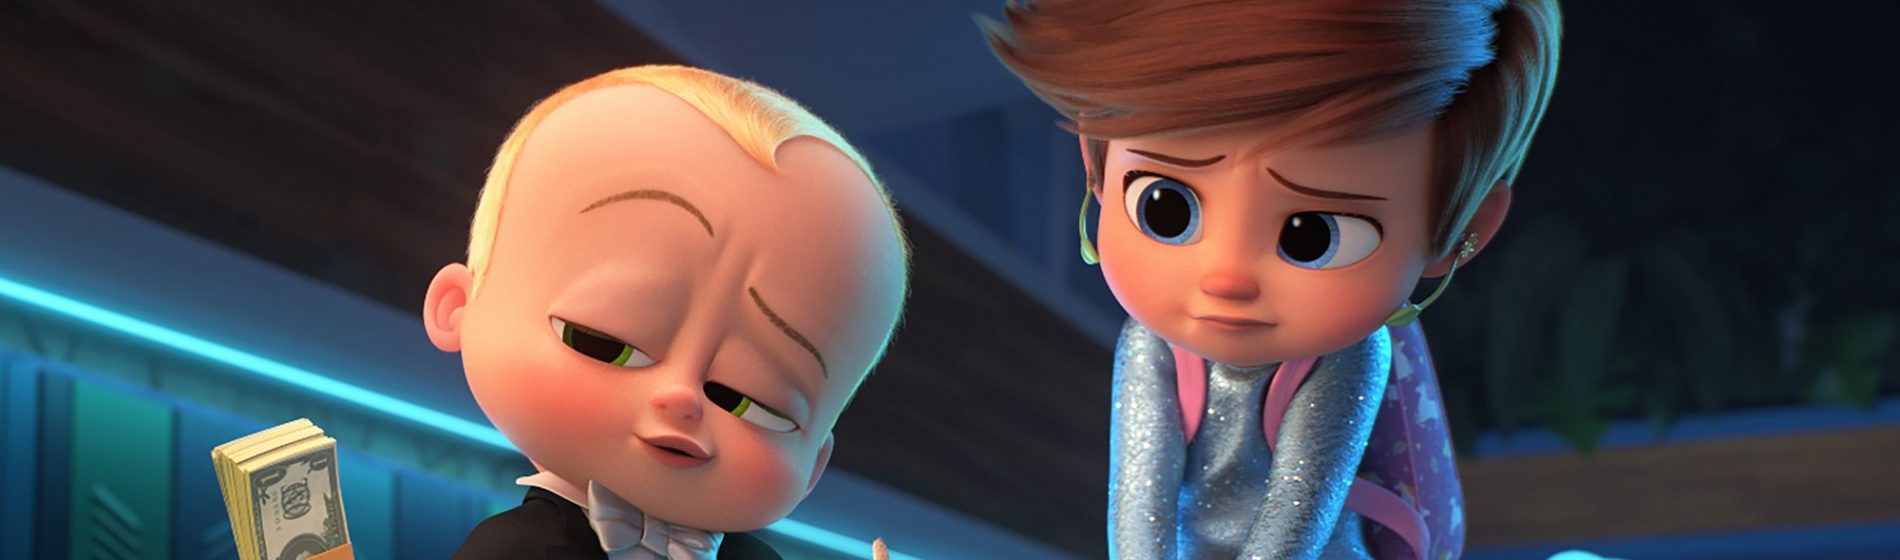 The Boss Baby: Family Business movie review